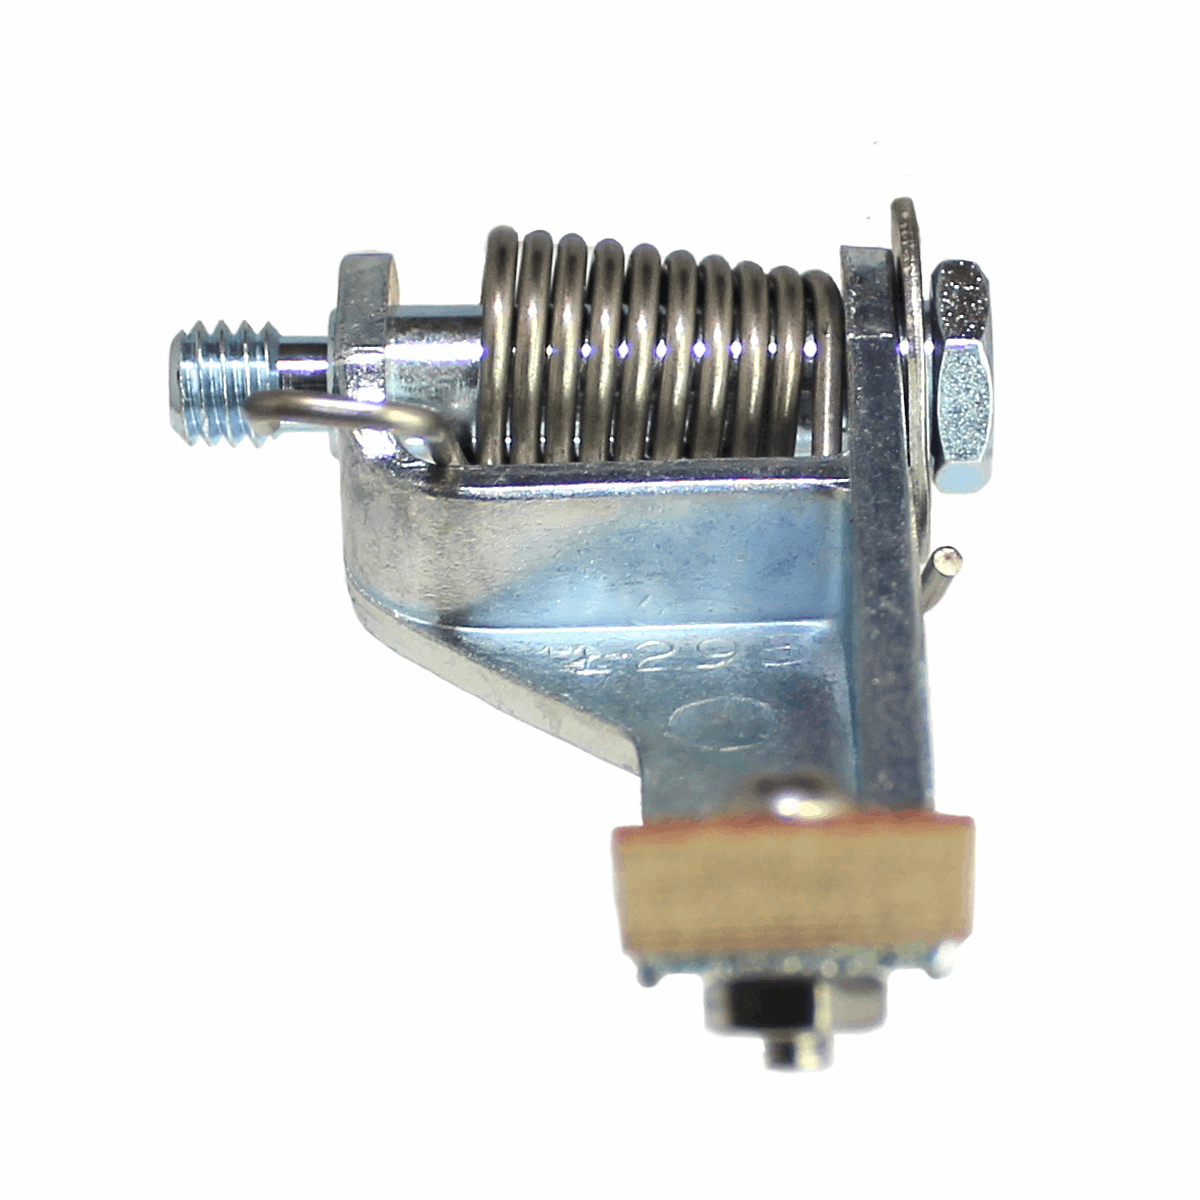 Cleaner Arm Assembly with Fiber Scraper, fits Biro Saws 11, 1433, 22, 33, 3334, 34, 44. Replaces 295 top view